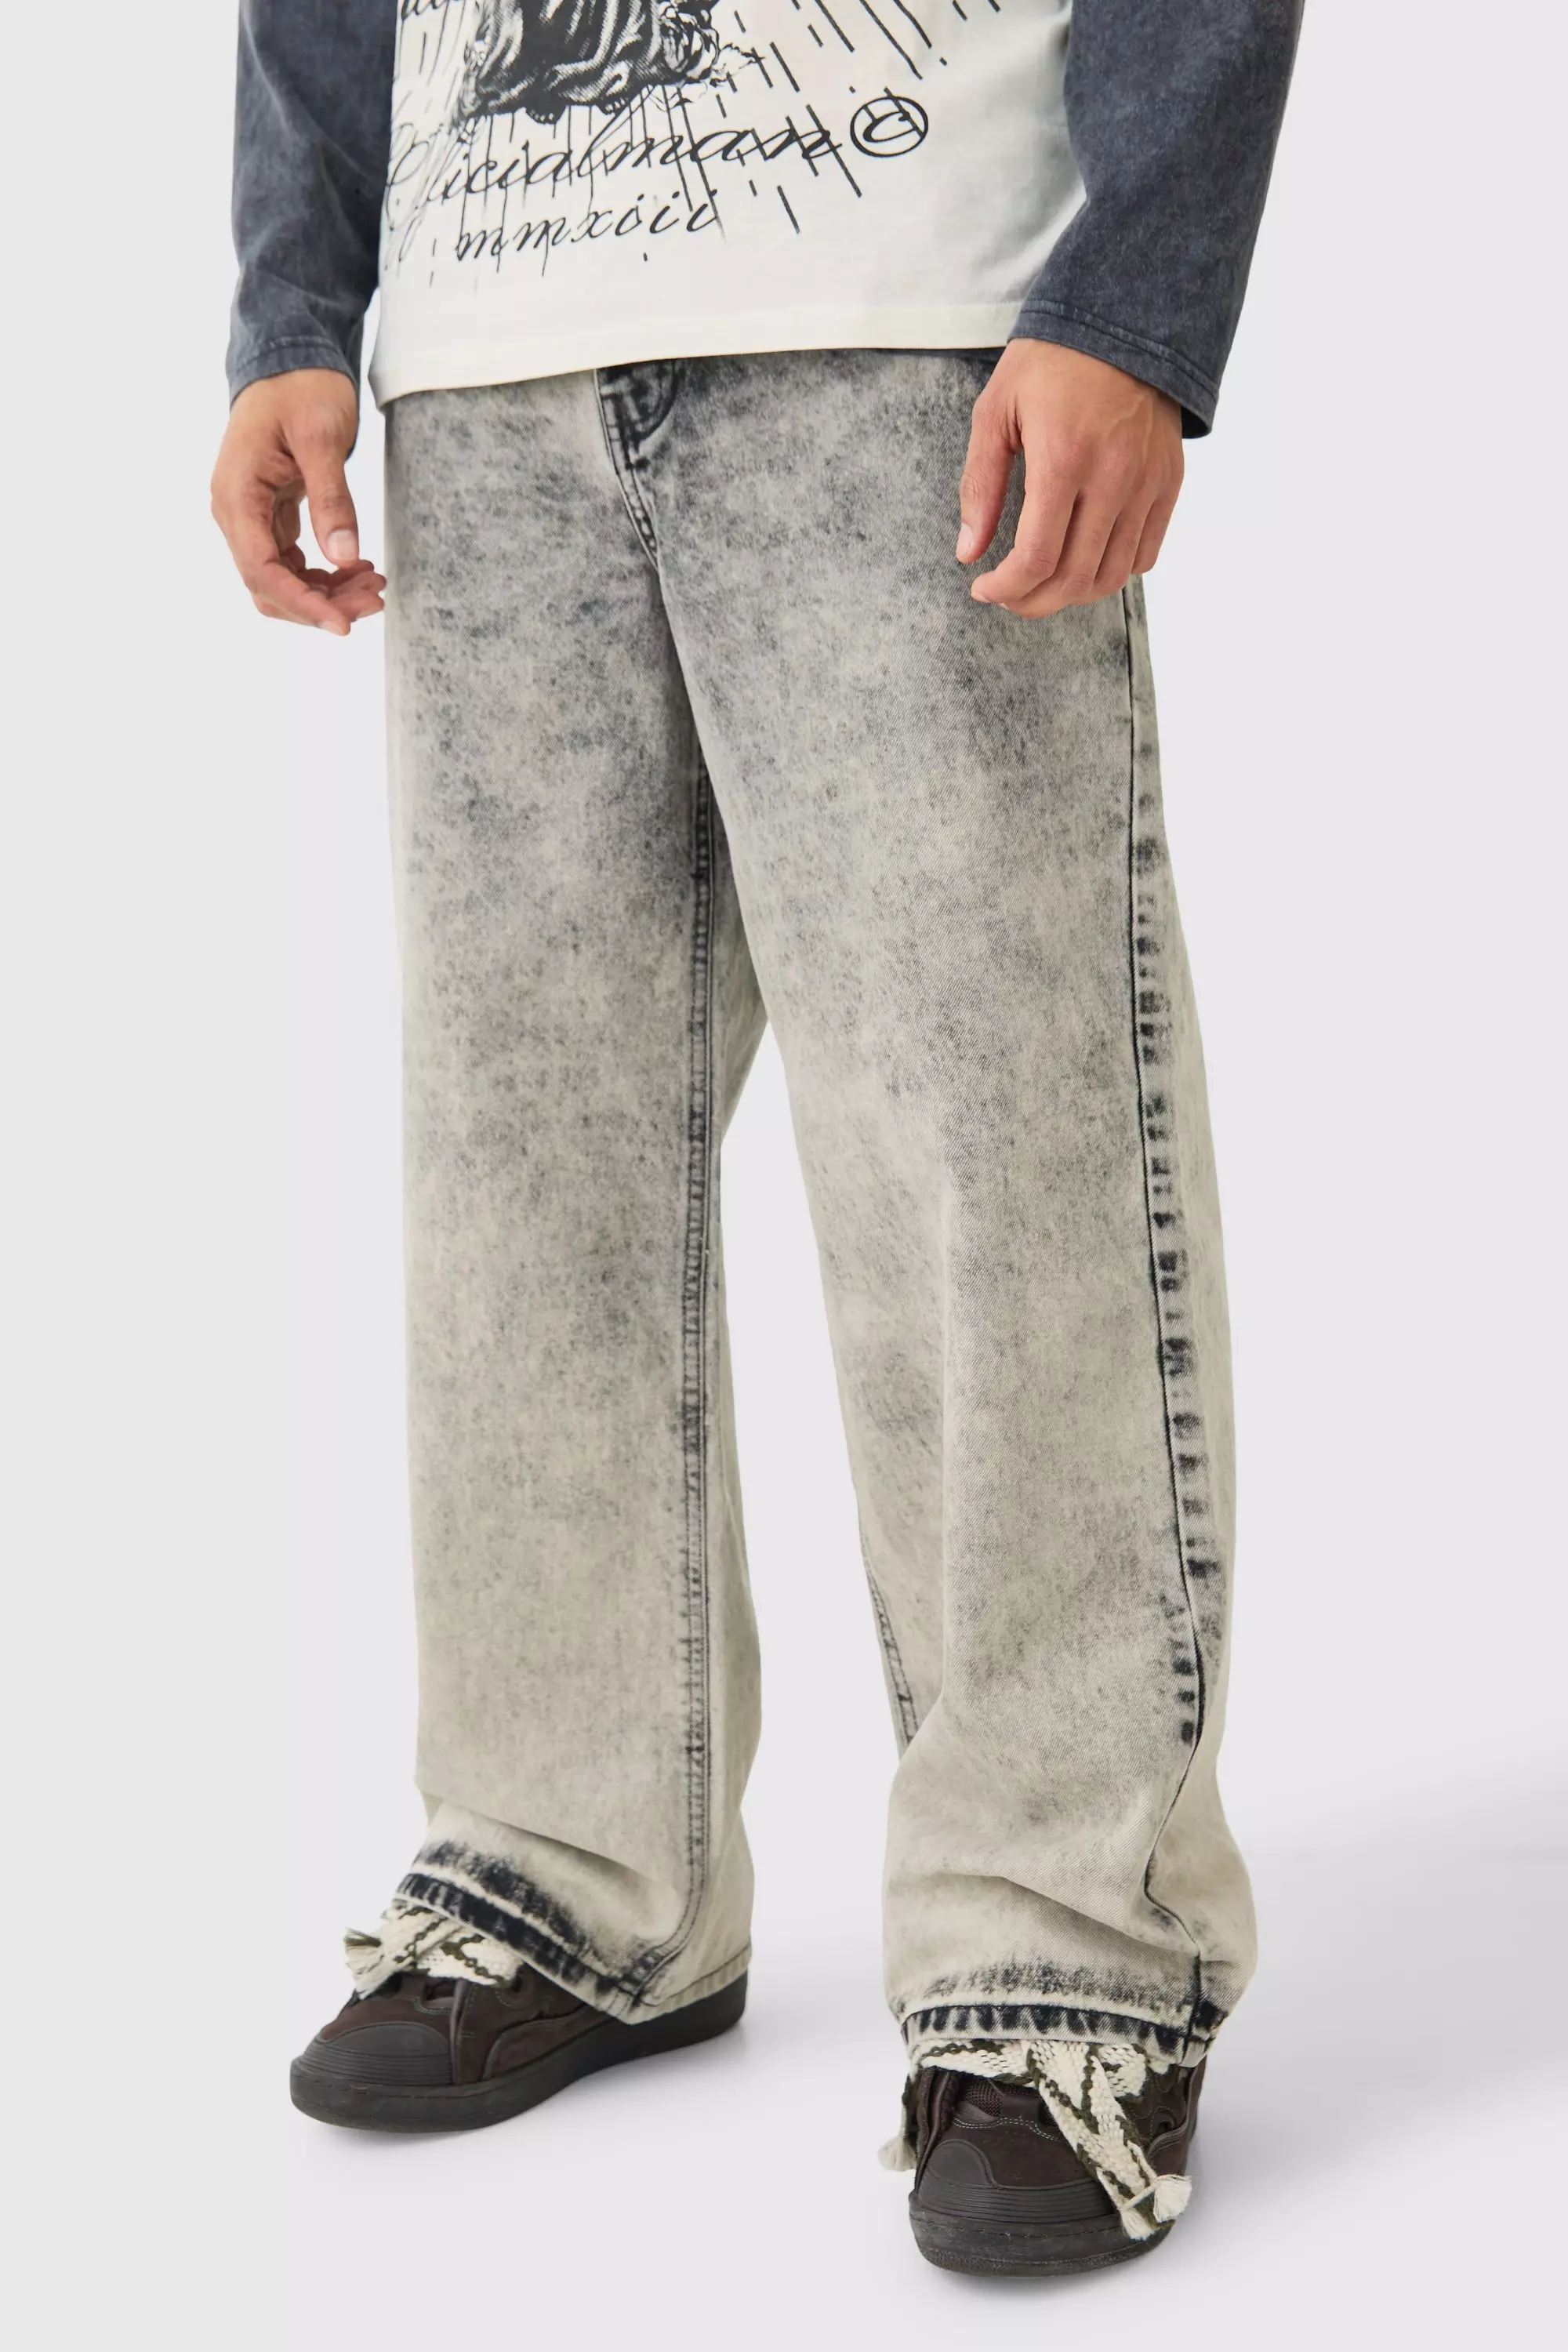 Extreme Baggy Rigid Acid Wash Jeans In Charcoal Charcoal